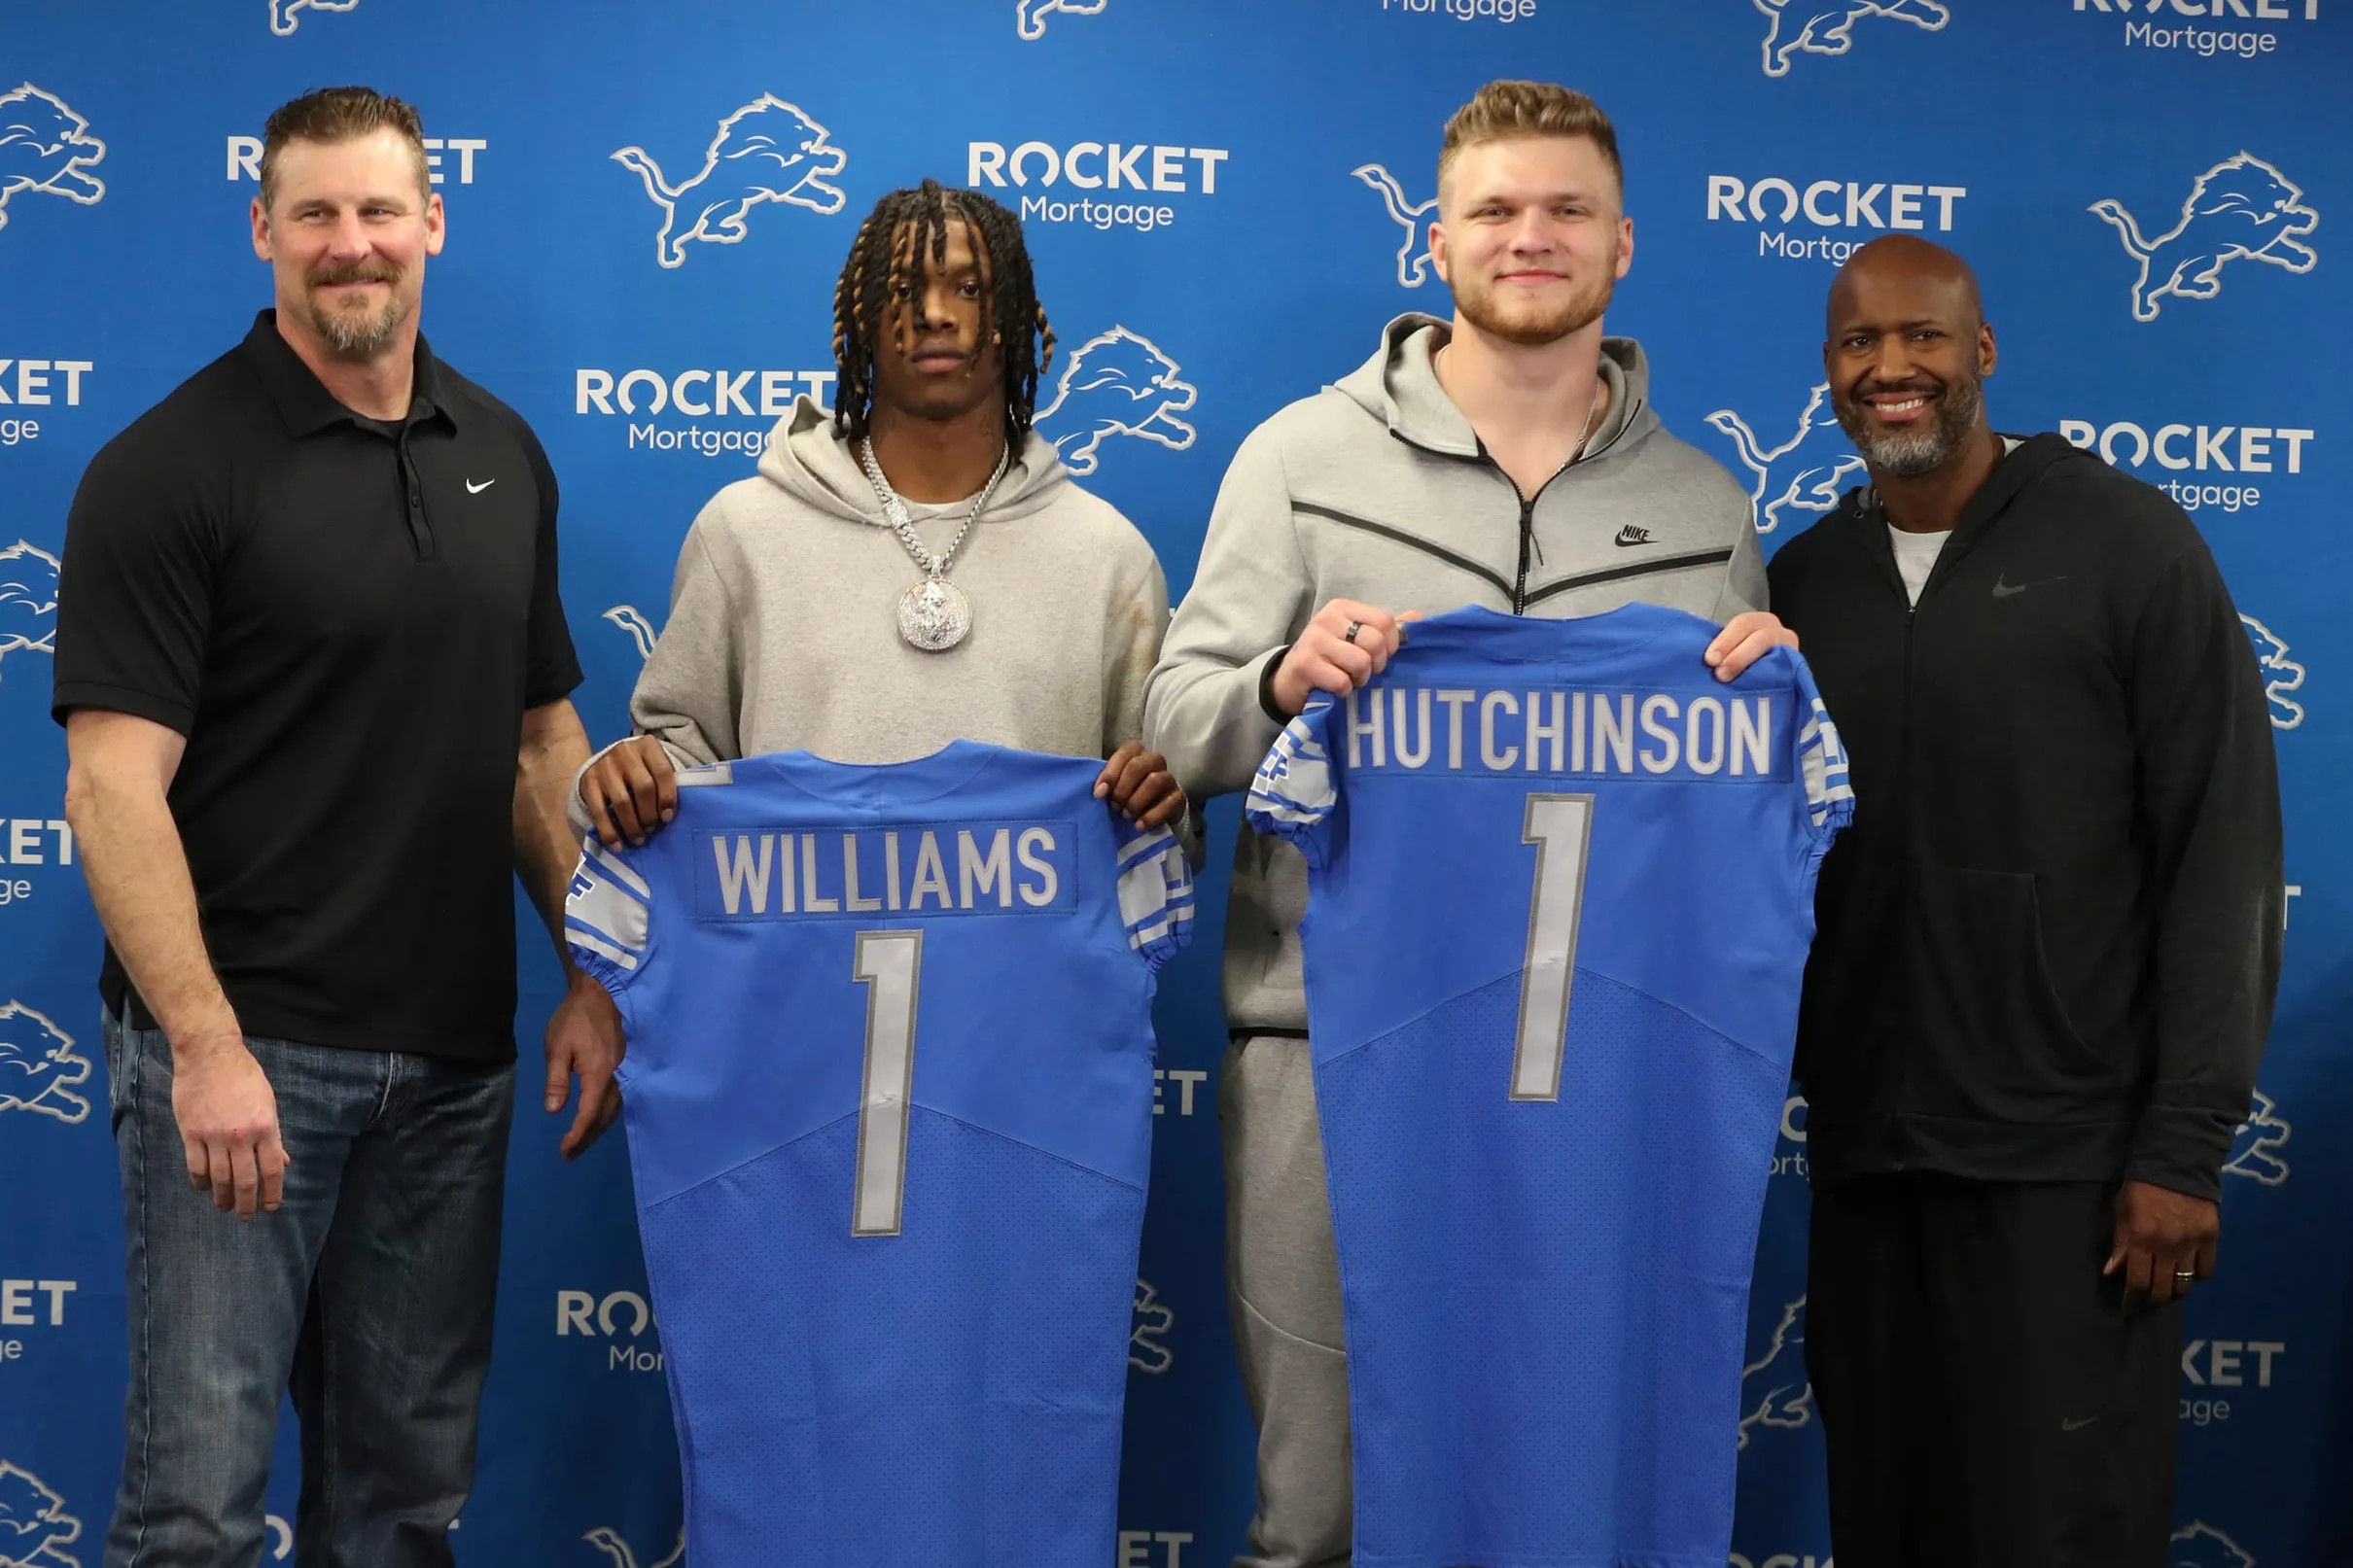 Full coverage, analysis of the Detroit Lions 2022 draft class